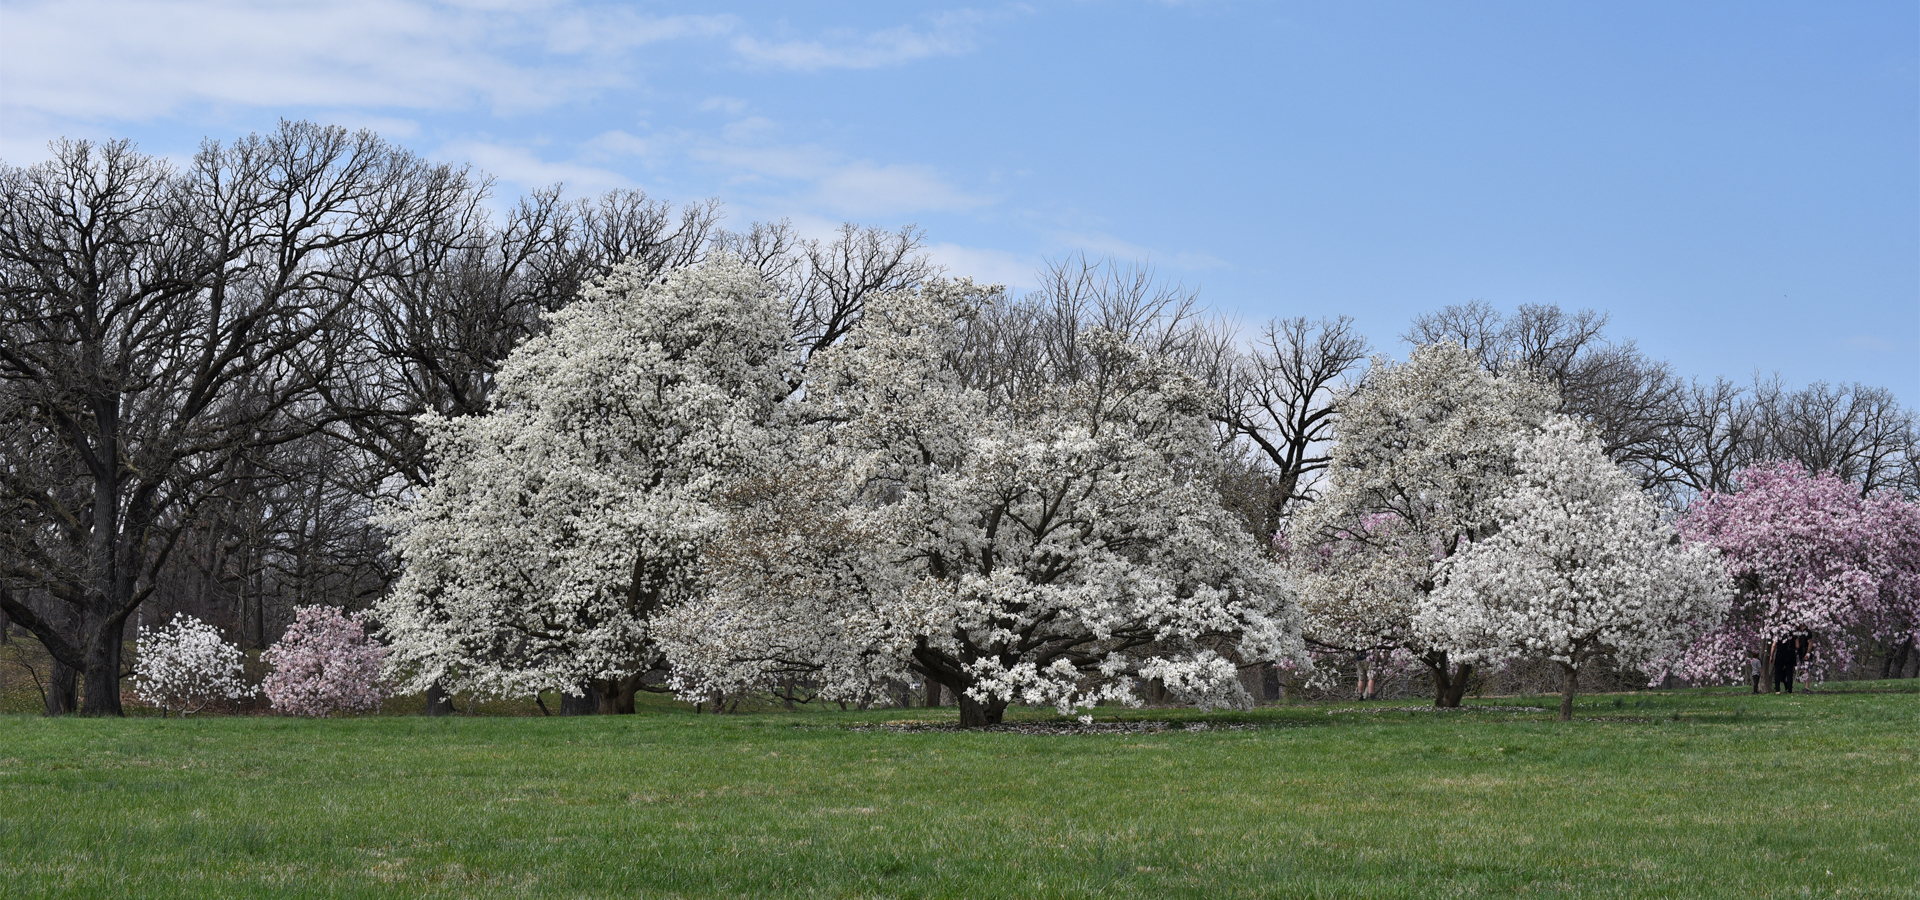 Magnolias bloom in the flowering trees collection in spring